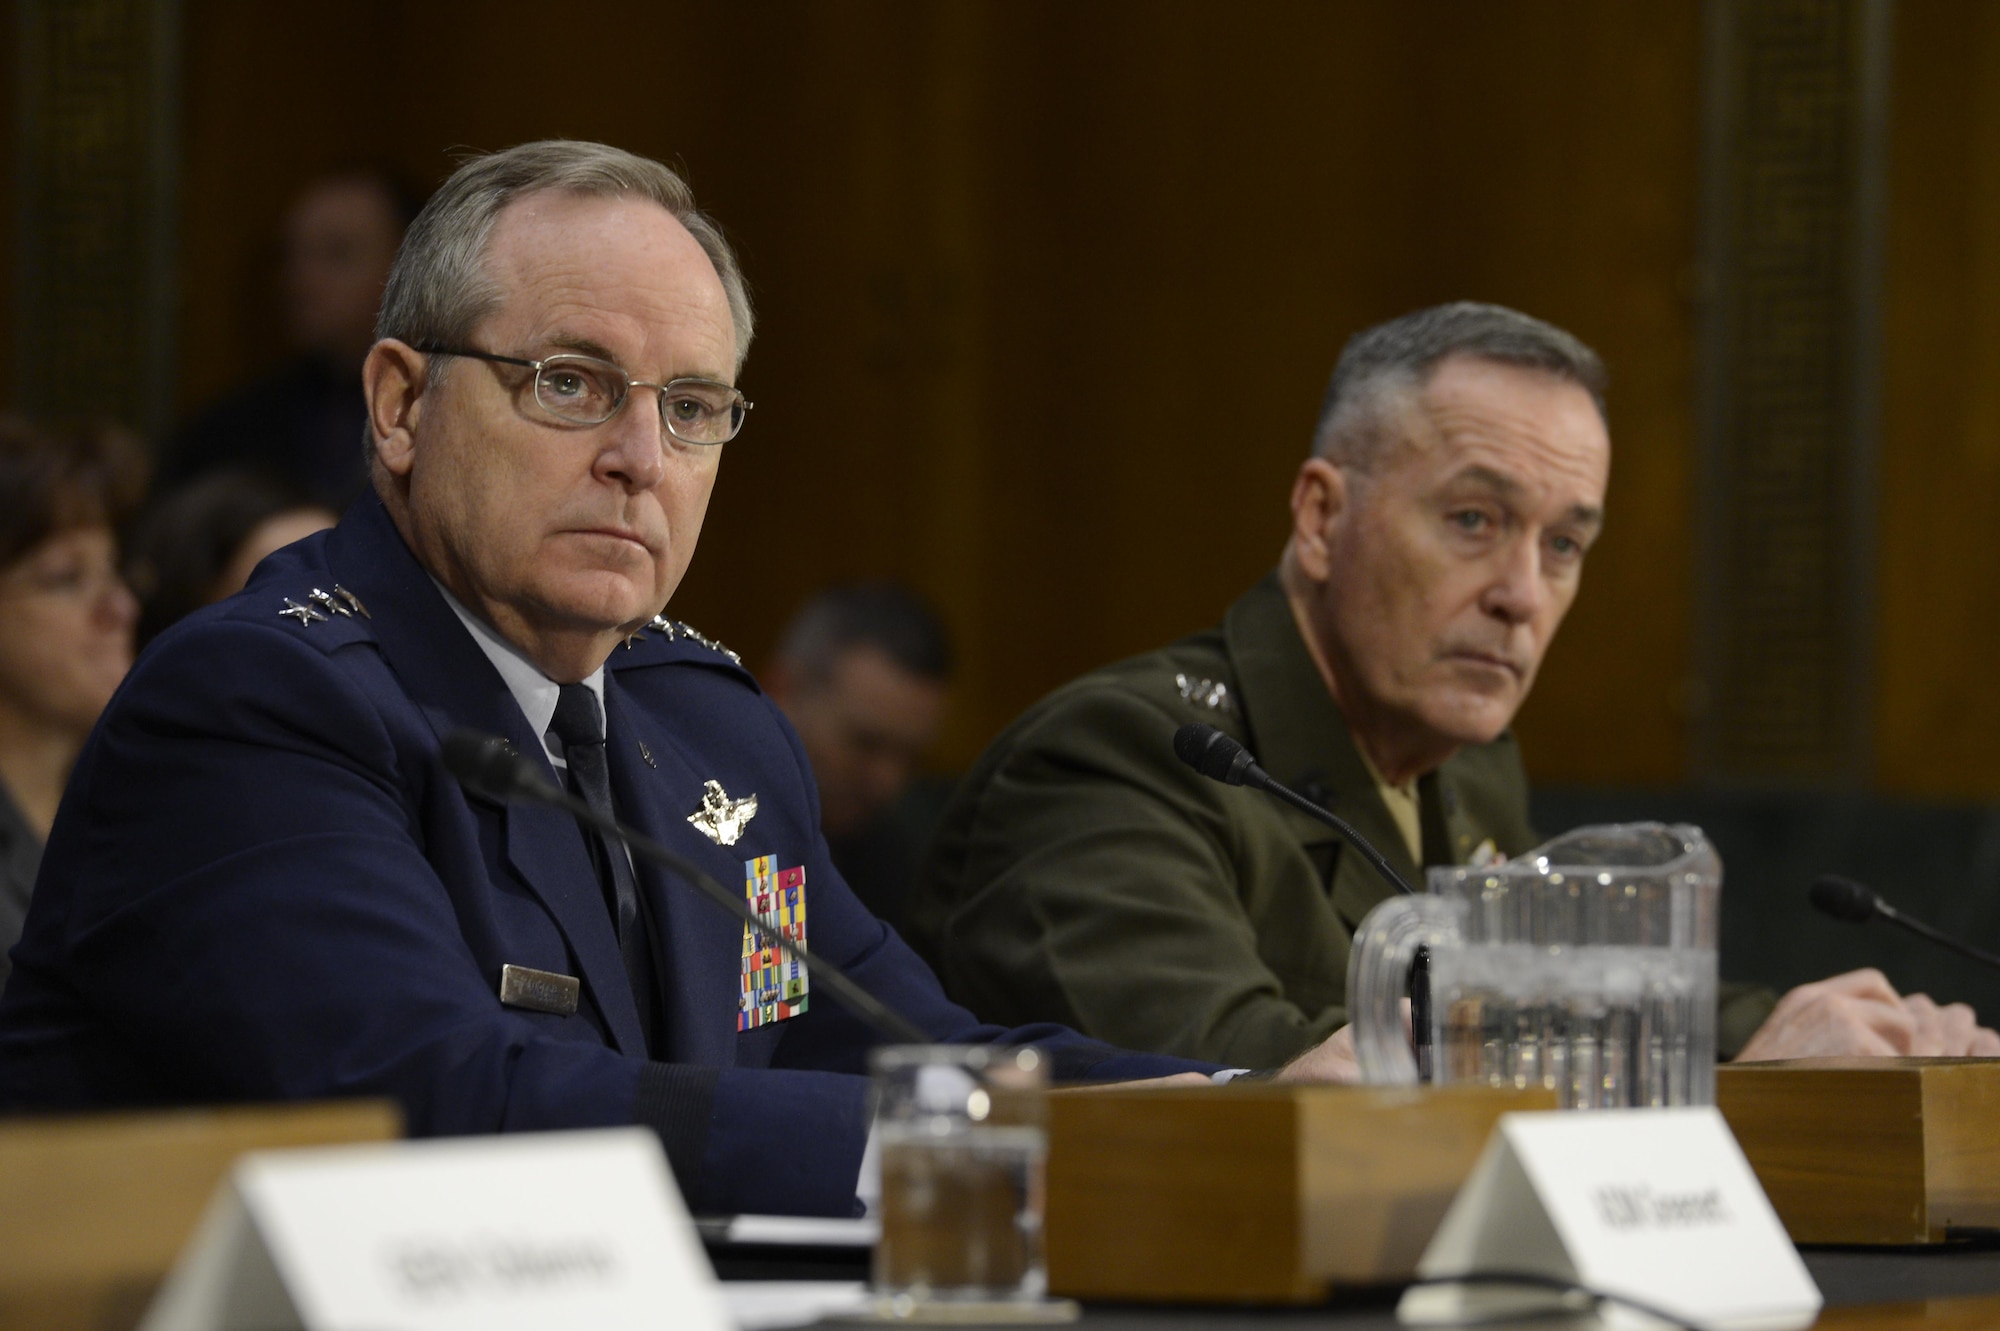 Air Force Chief of Staff Gen. Mark A. Welsh III testifies before the Senate Armed Services Committee Jan. 28, 2015, in Washington, D.C., as Commandant of the Marine Corps Gen. Joesph F. Dunford Jr., looks on. Other service leaders present during the hearing were Chief of Staff of the Army Gen. Raymond Odierno and Chief of Naval Operations Adm. Jonathan W. Greenert. (U.S. Air Force photo/Scott M. Ash)